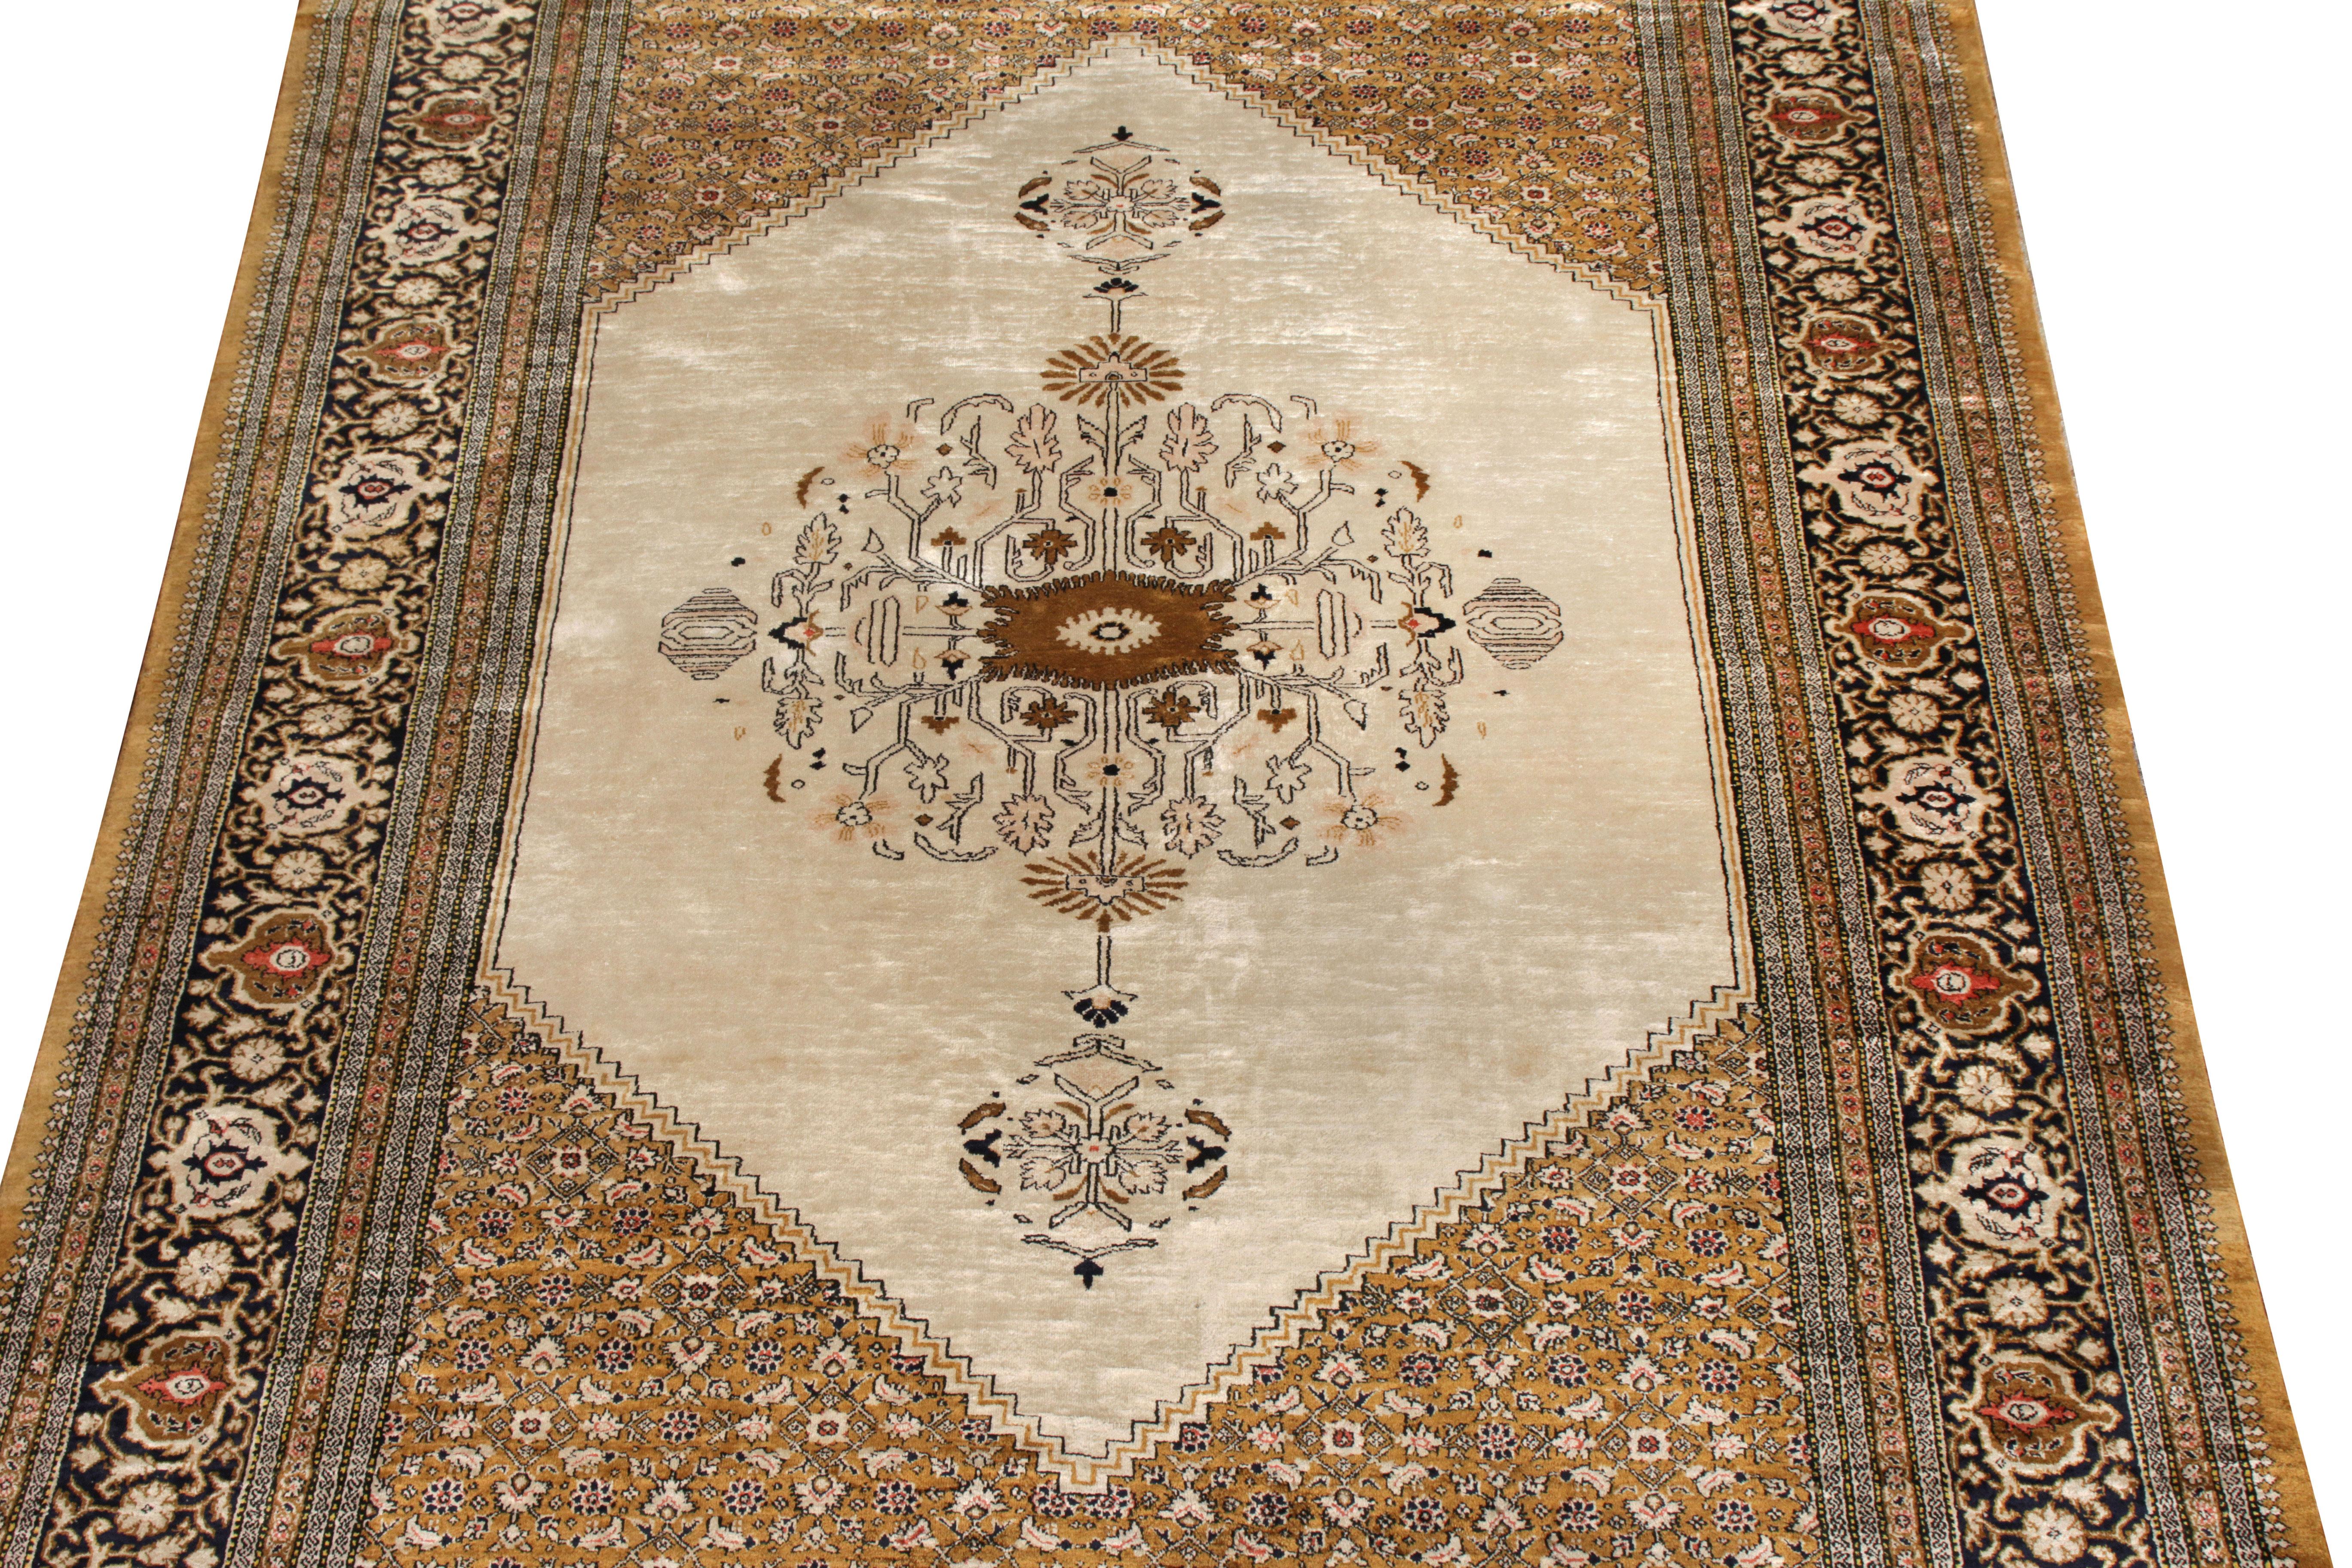 Originating from Persia circa 1950-1960, this vintage Persian rug is a distinct piece of its Qum design lineage with fabulous aesthetics and natural silk composition. The vision of this 4x6 design manifests an attractive beige-brown in medallion